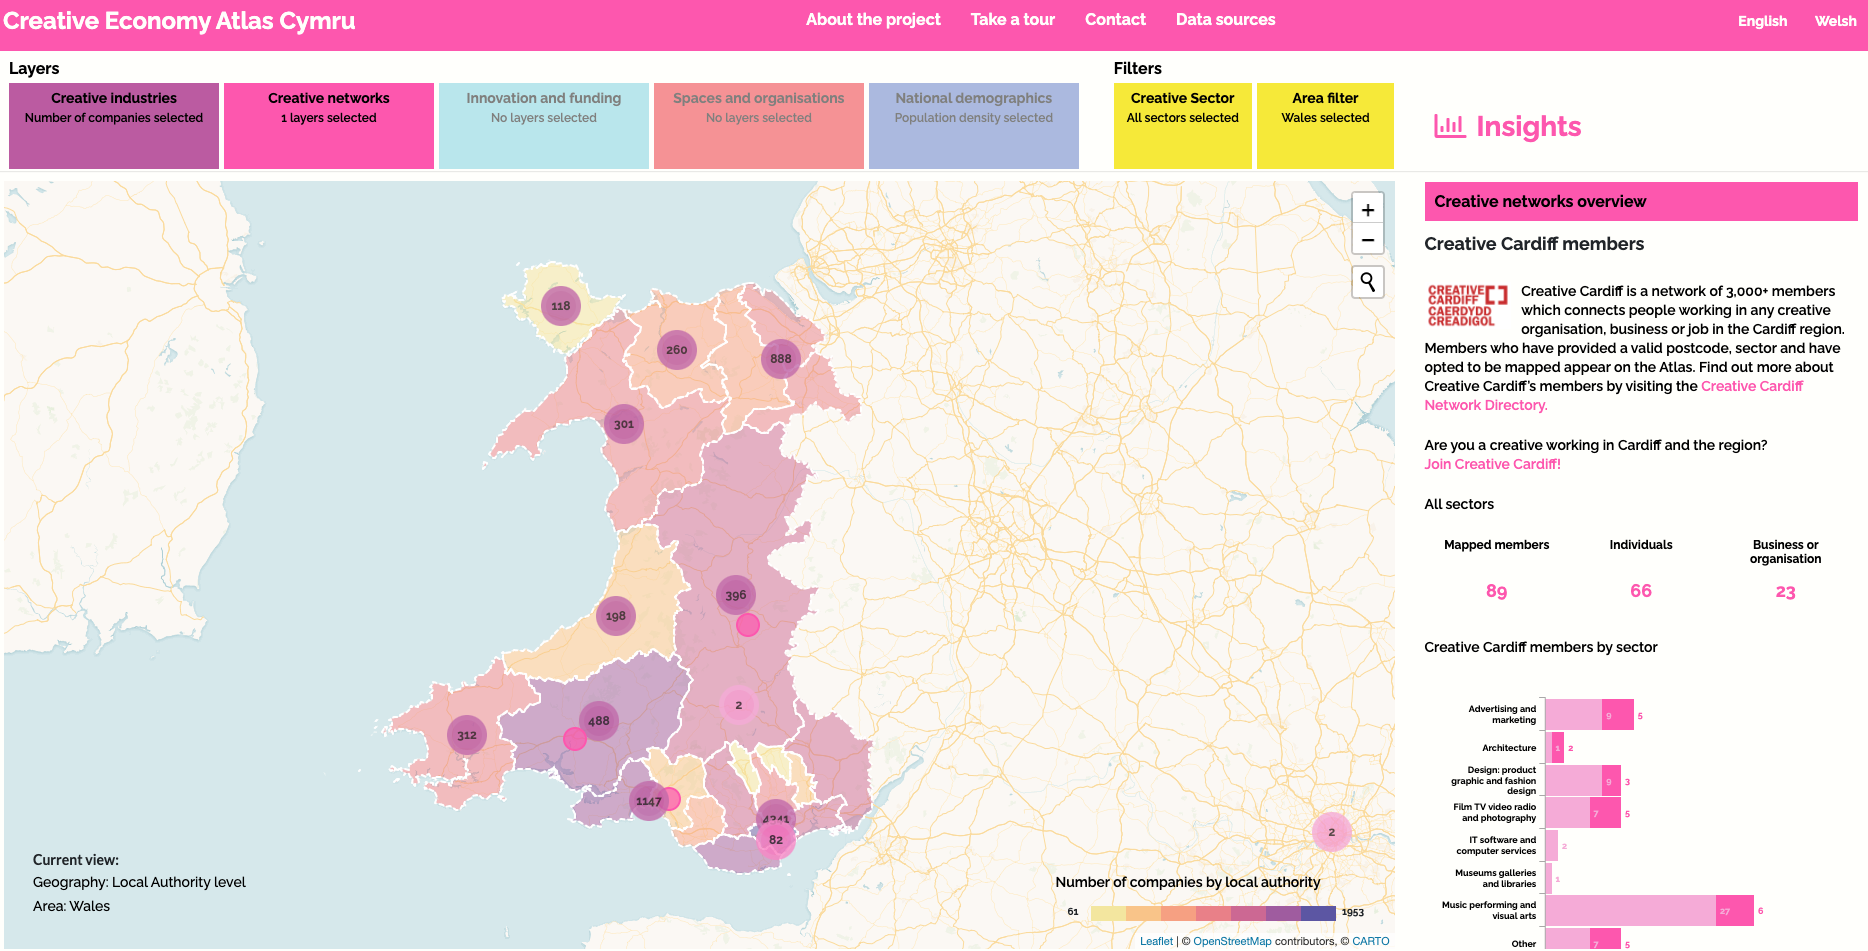 Map of Wales showing the Creative Cardiff network members layer of data